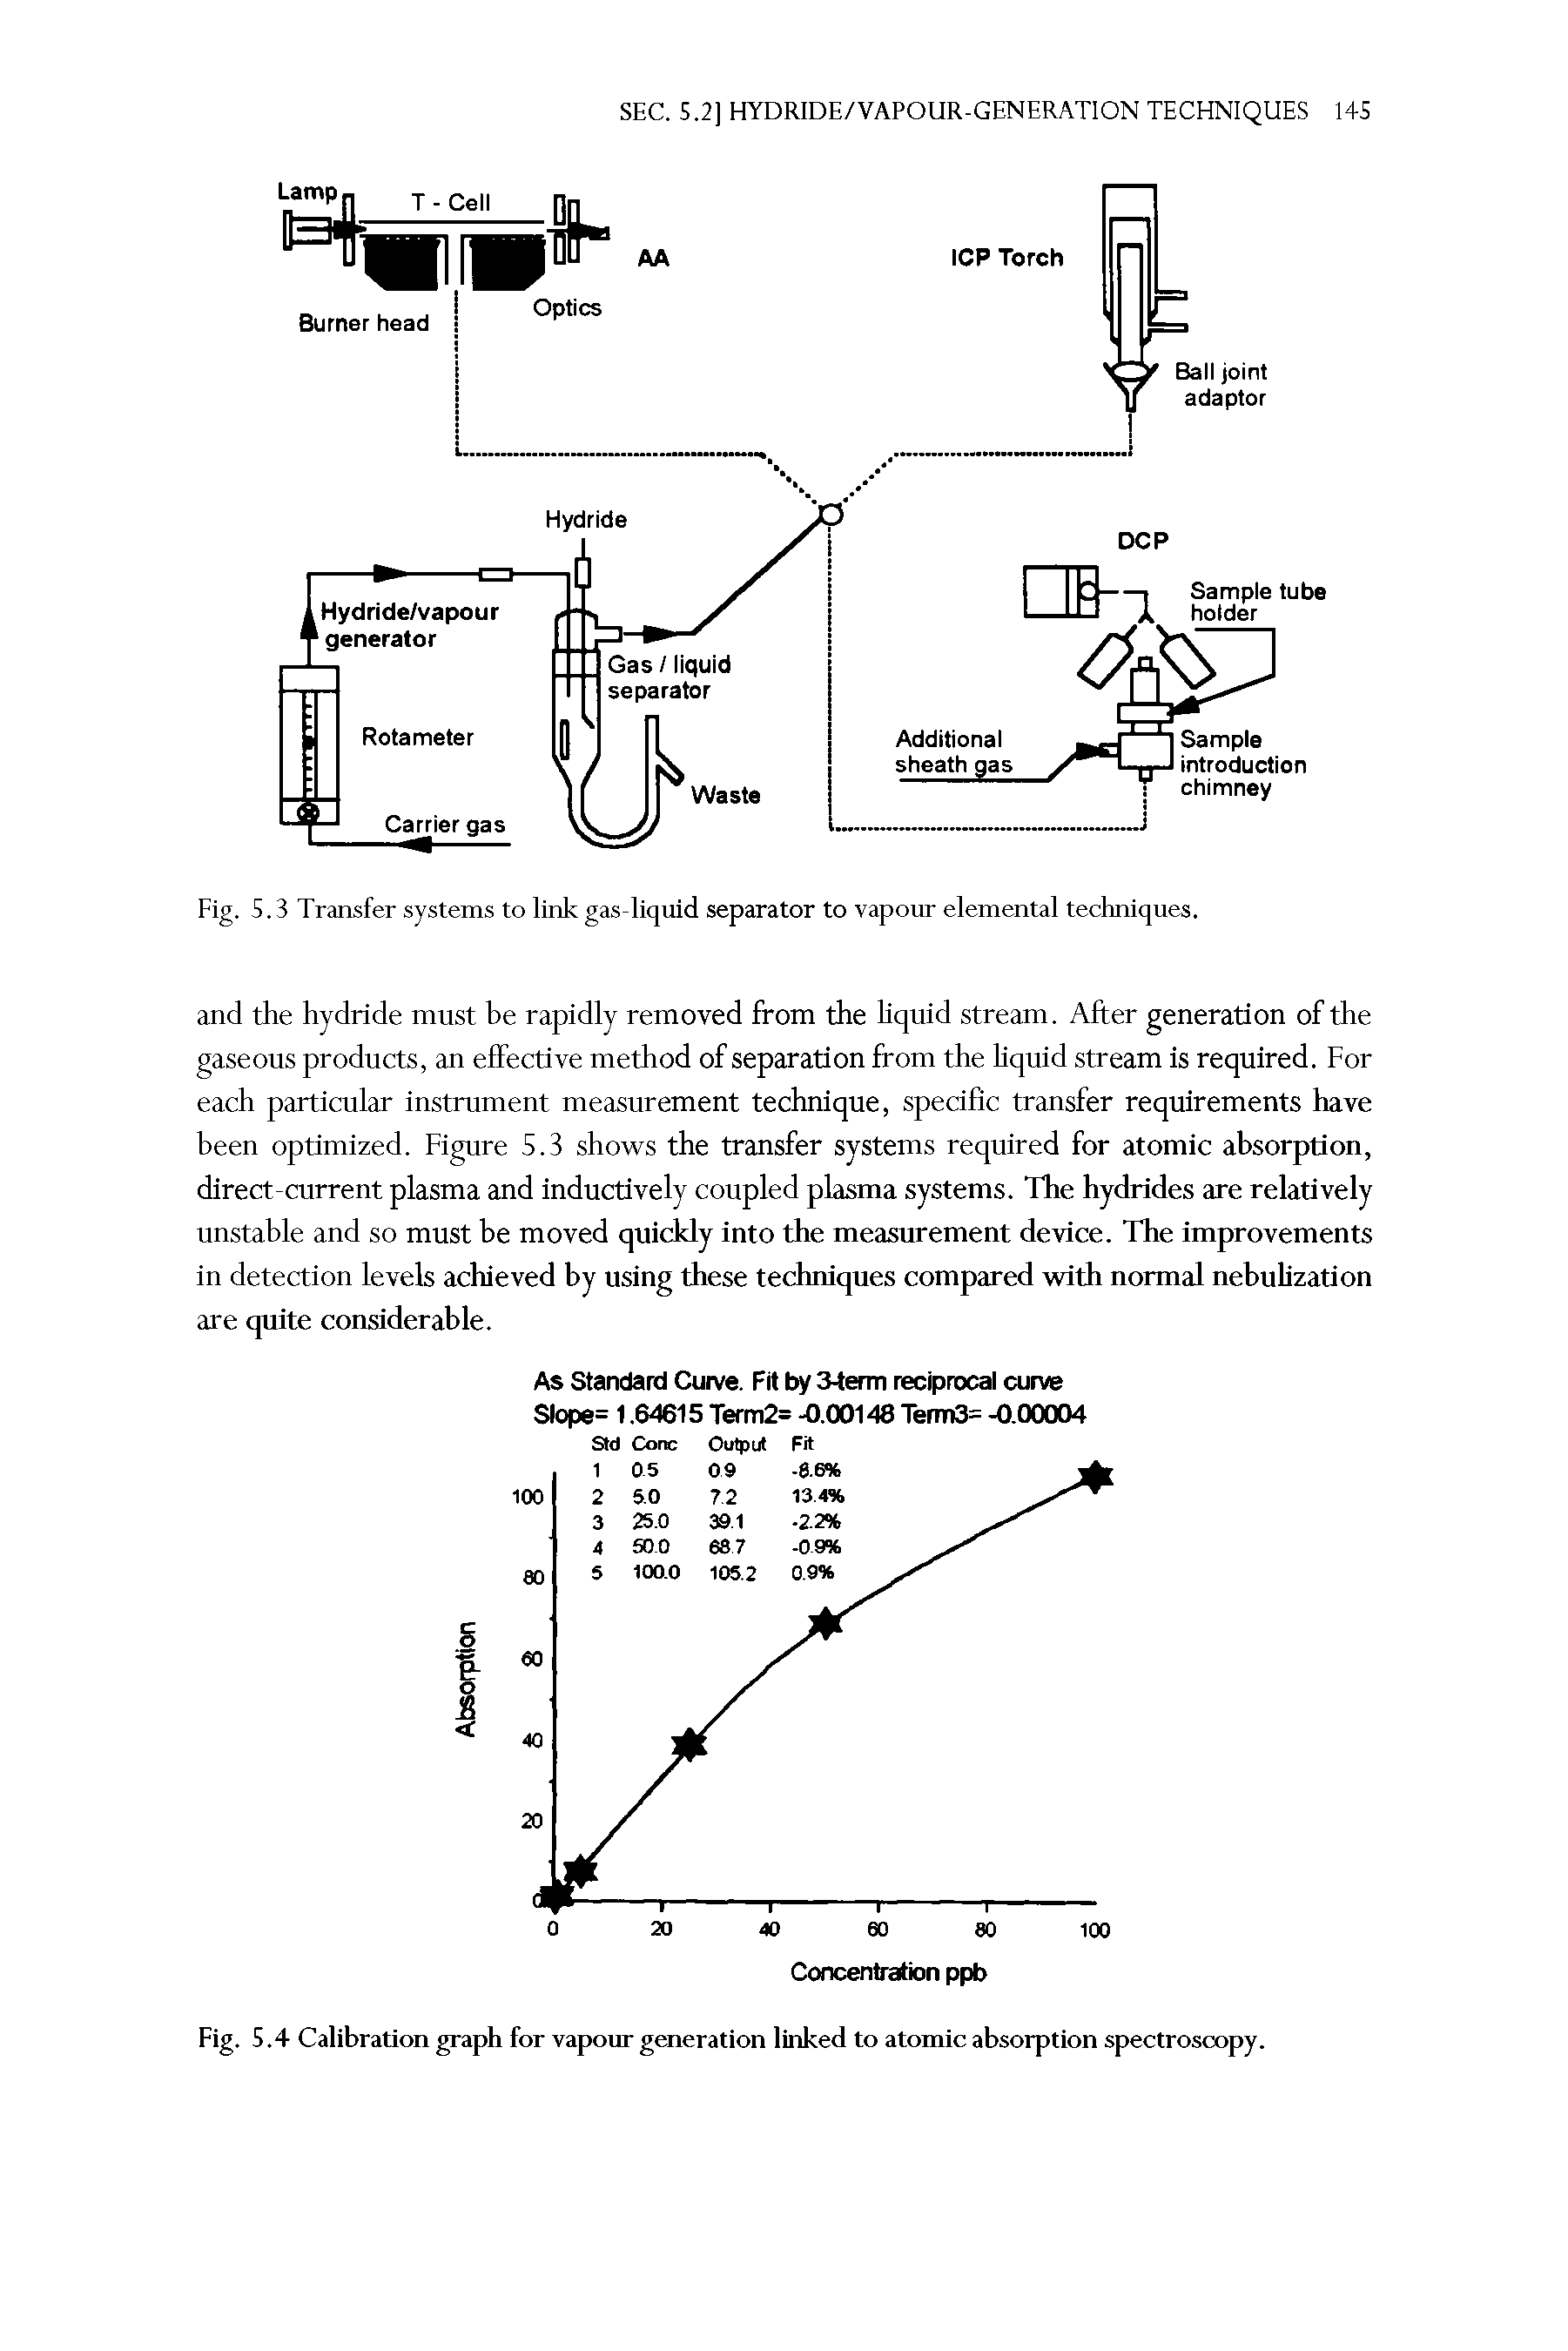 Fig. S. 3 Transfer systems to link gas-liquid separator to vapour elemental techniques.